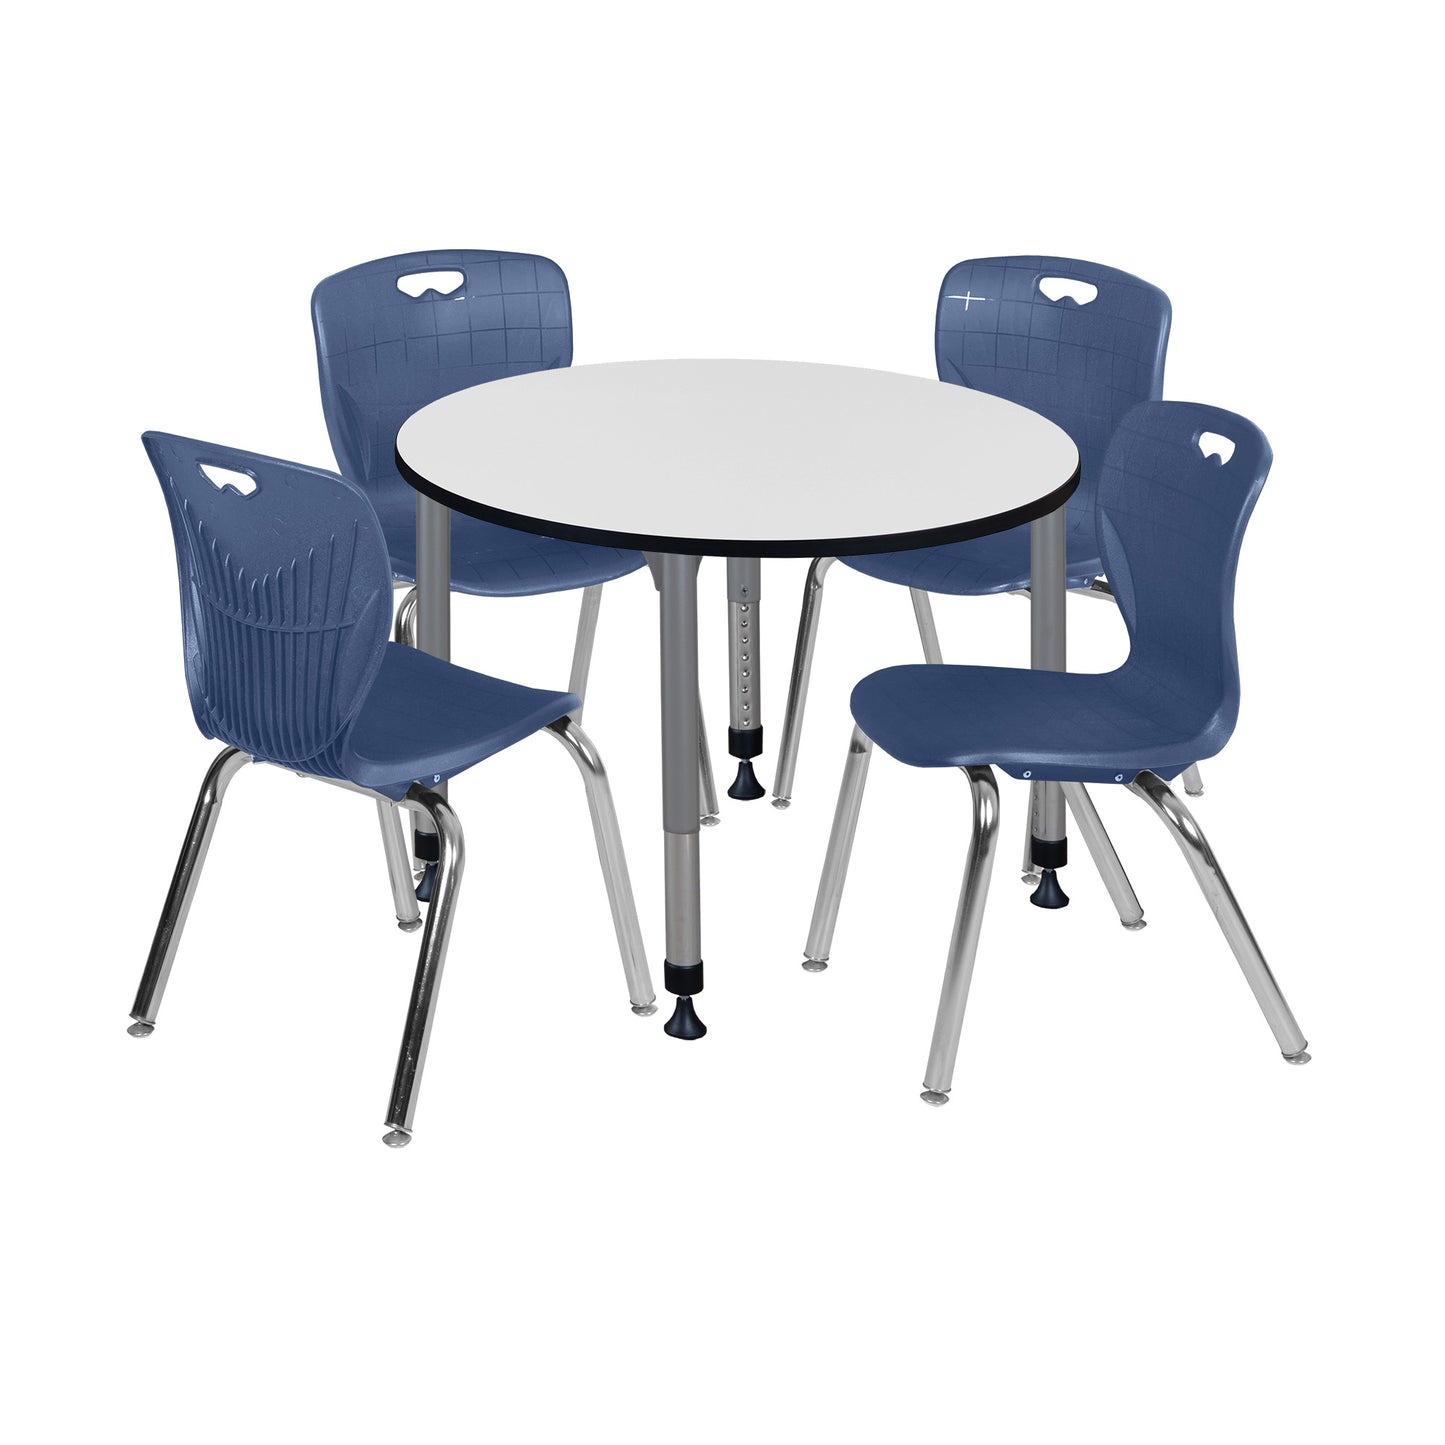 Regency Kee 36 in. Round Adjustable Classroom Table & 4 Andy 18 in. Stack Chairs